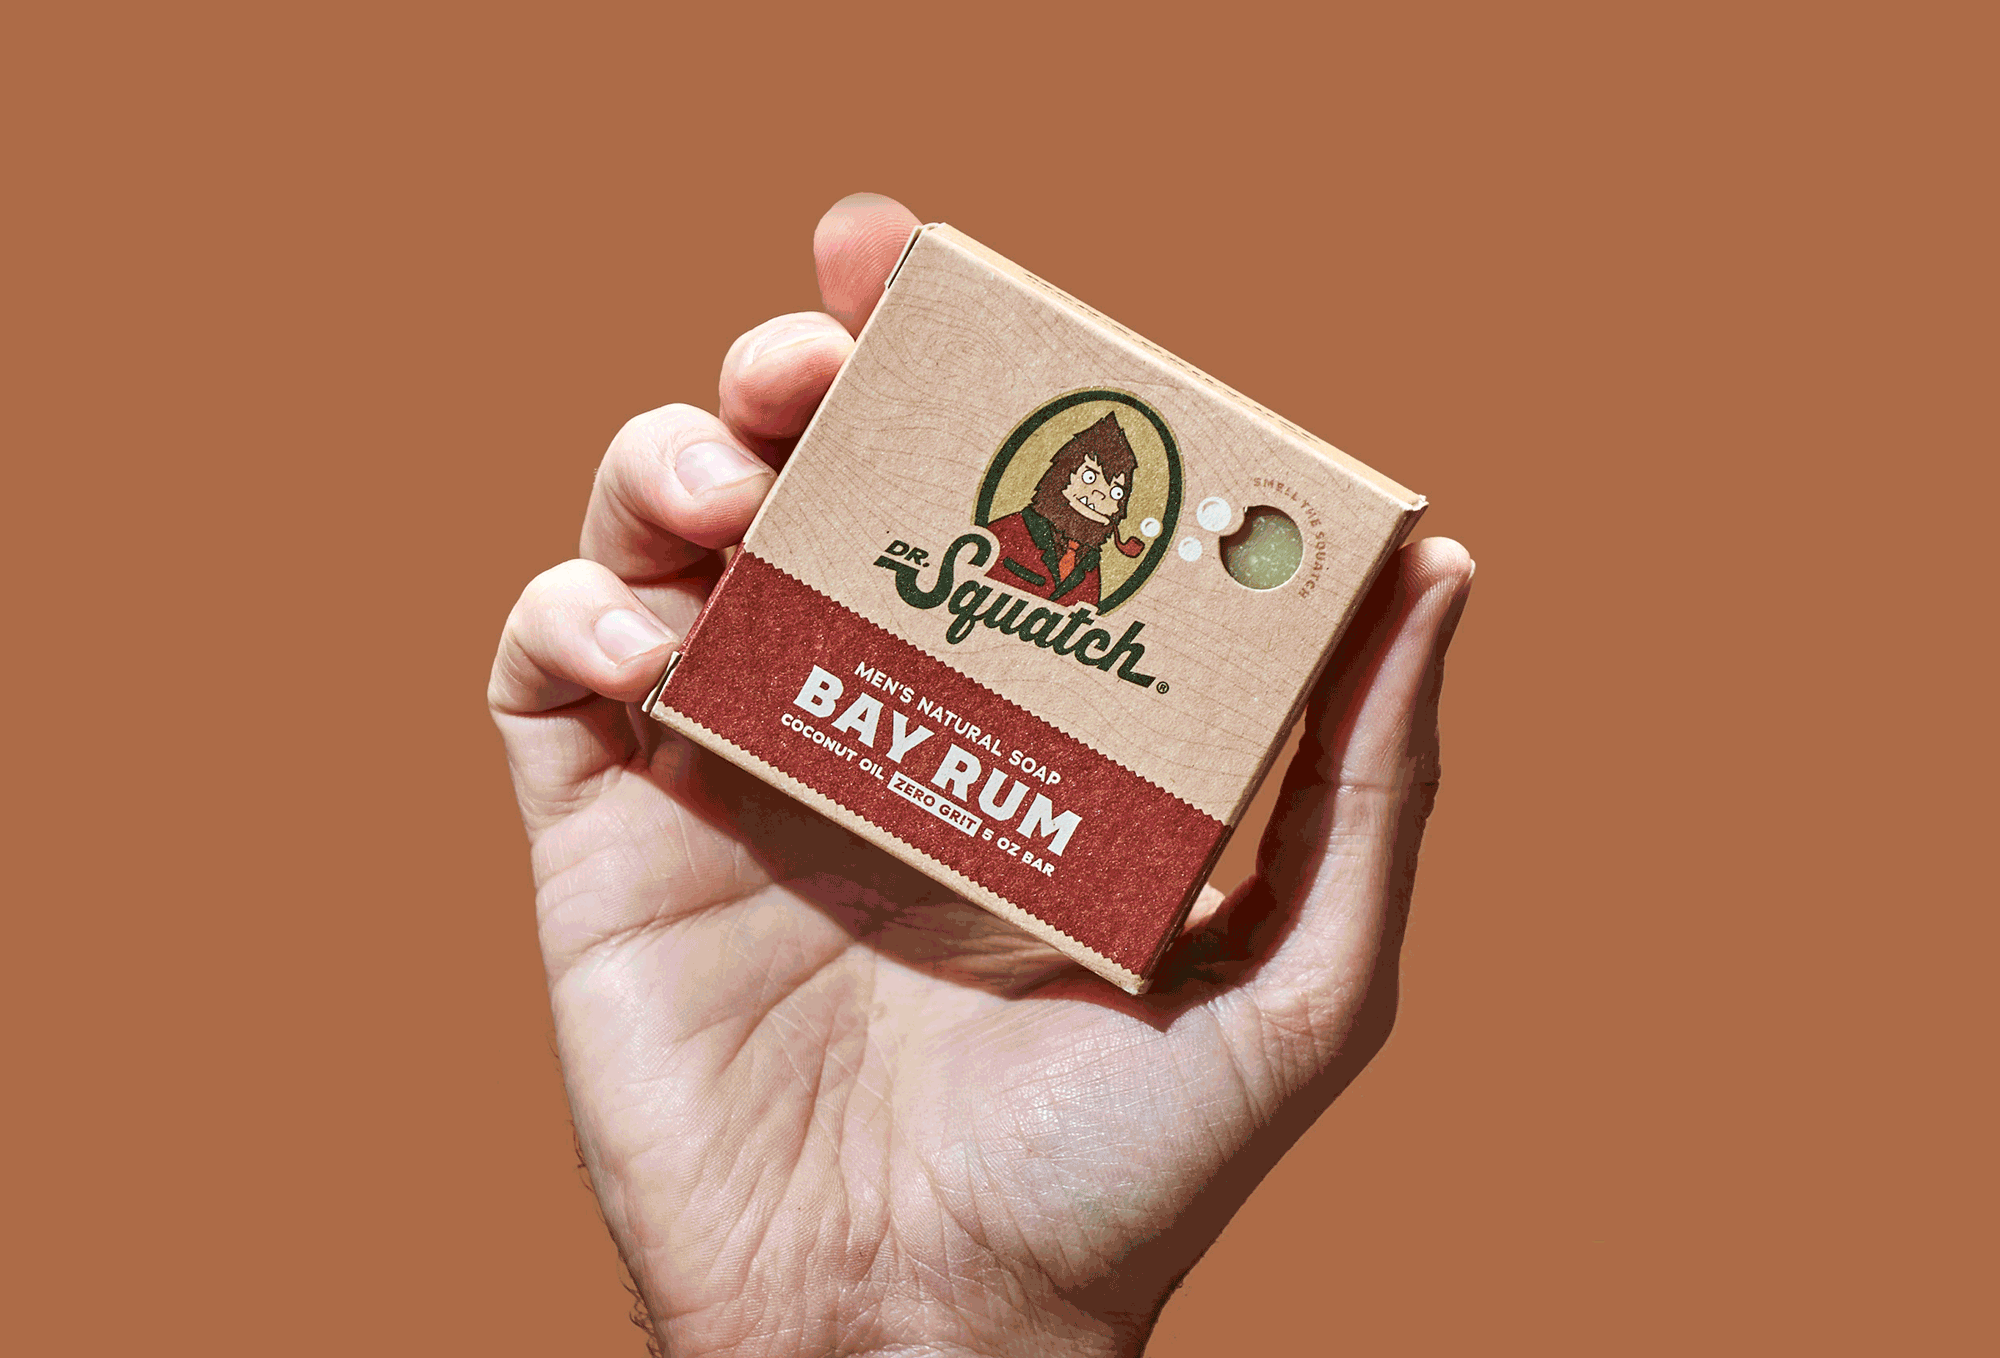 Dr Squatch Uses Natural Ingredients Shea Butter GIF - Dr Squatch